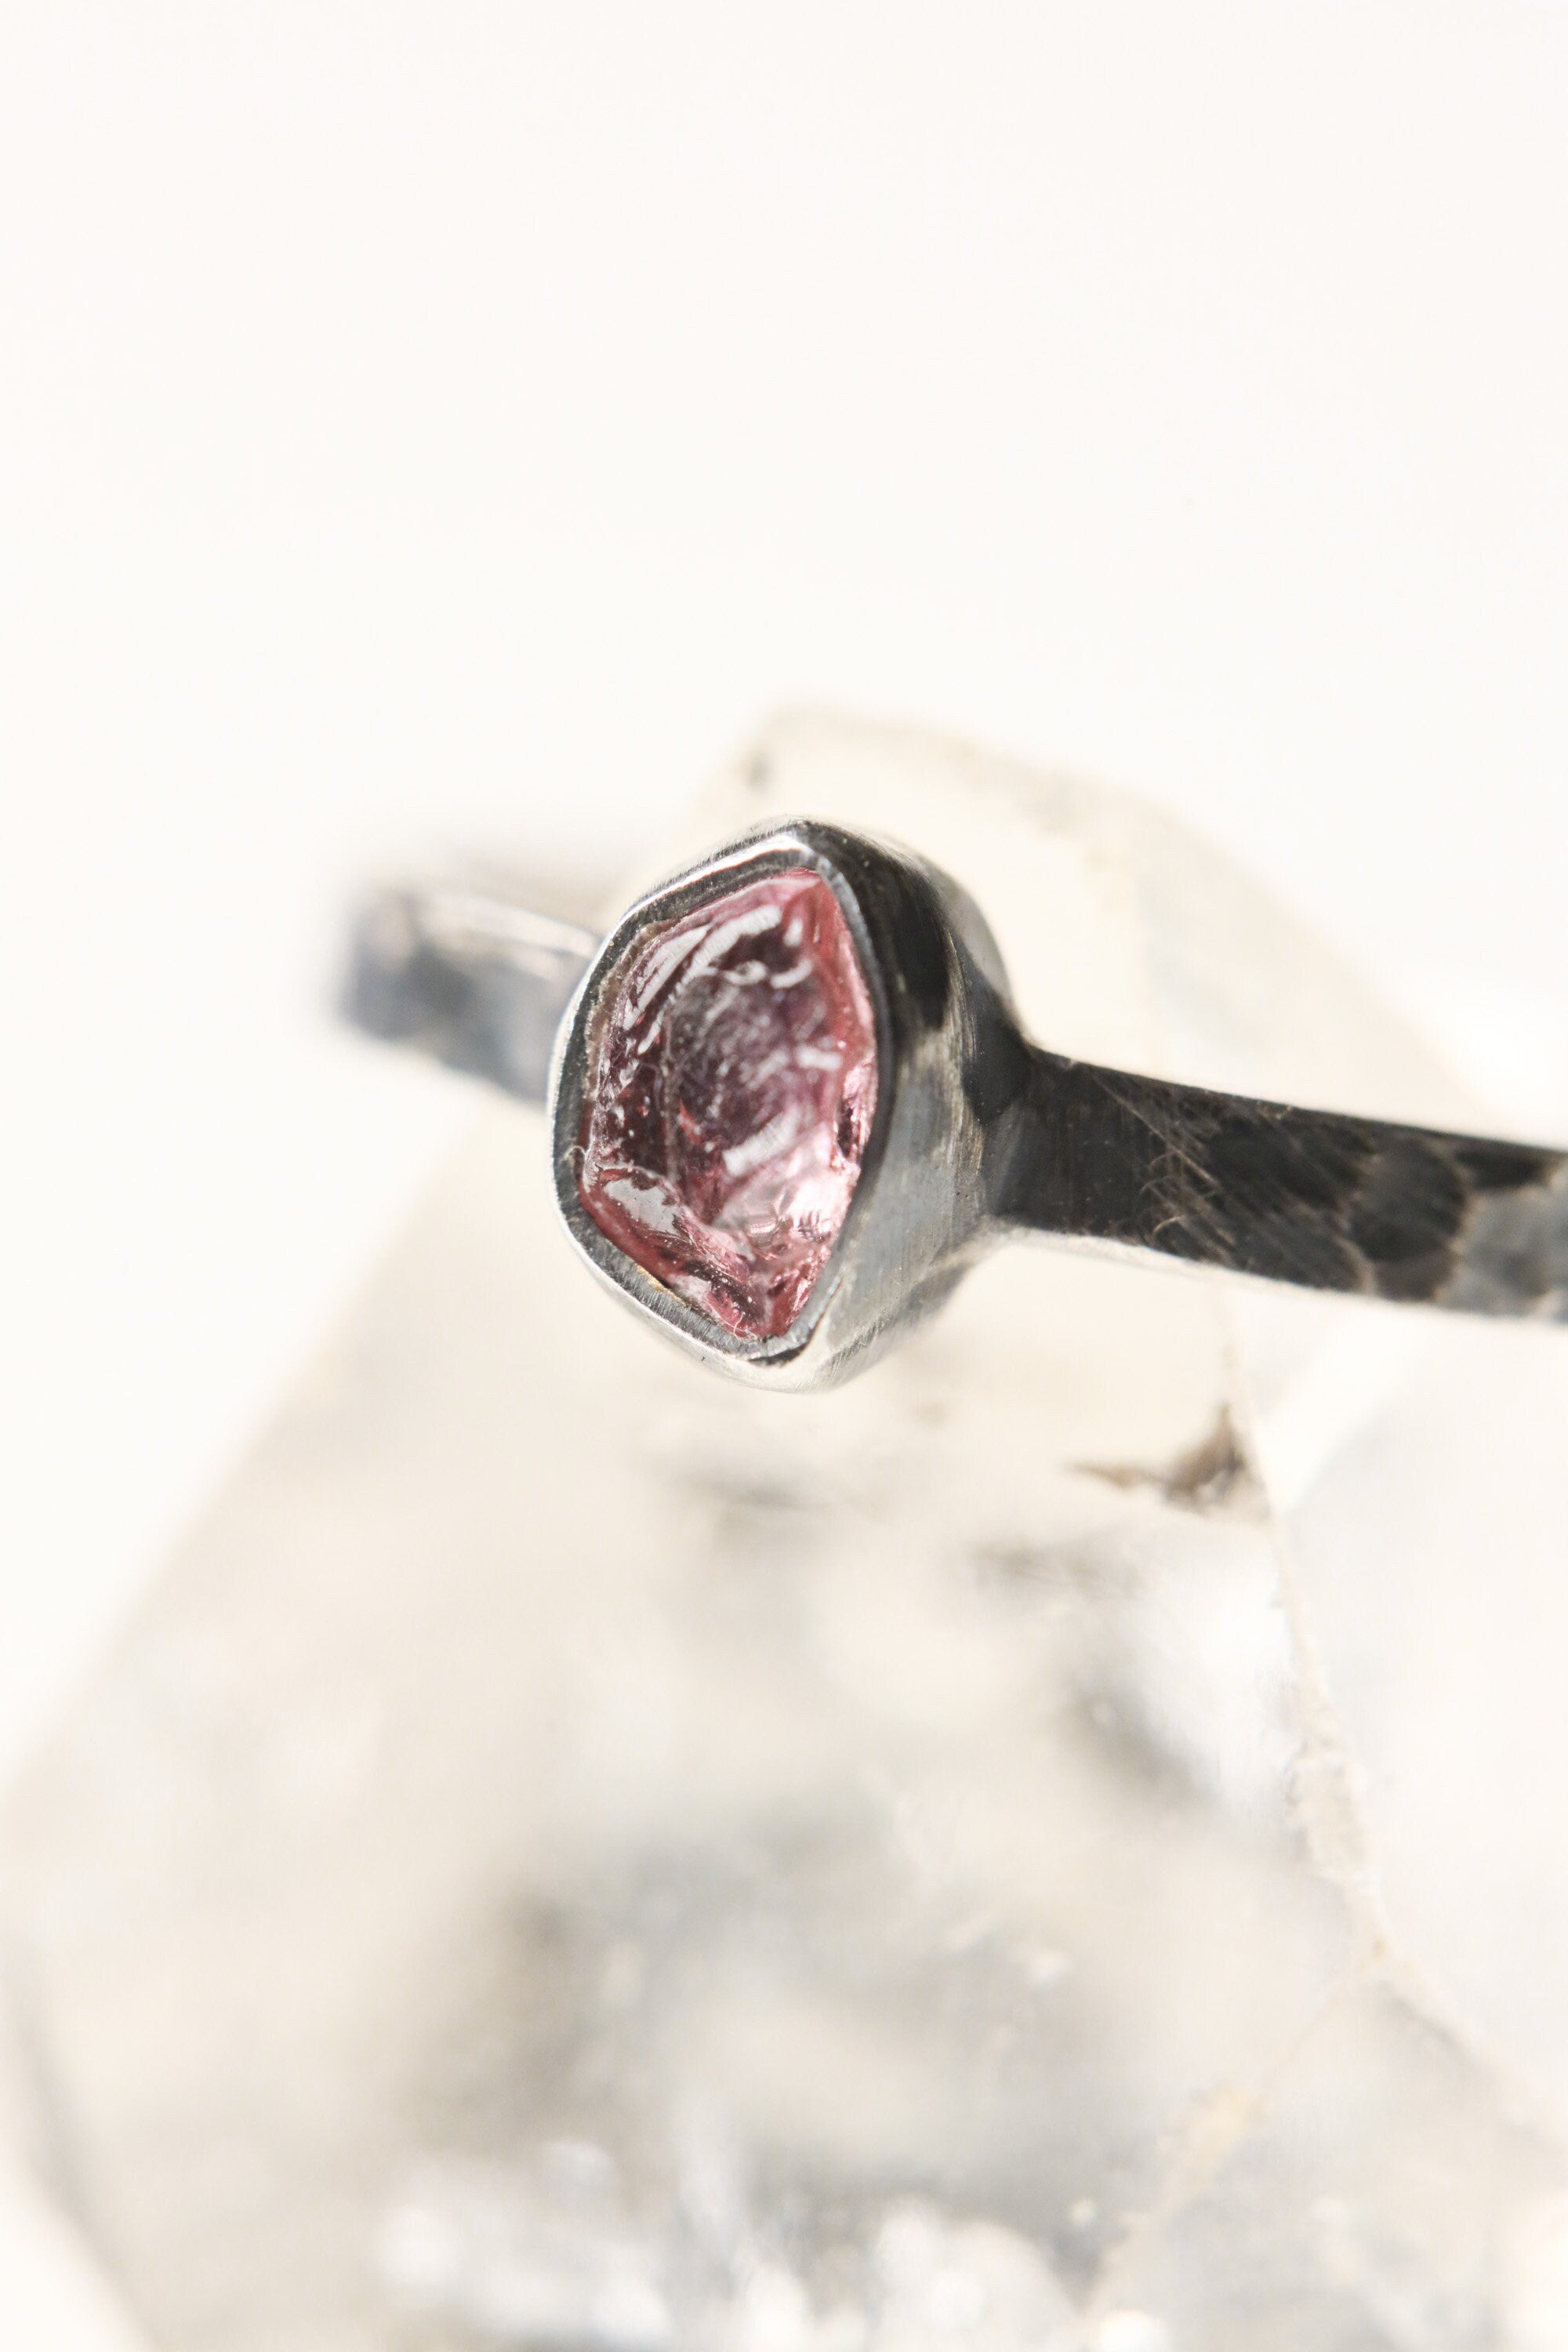 Eternal Blush - Sterling Silver Ring with Pink Tourmaline - Size 6 US - NO/01